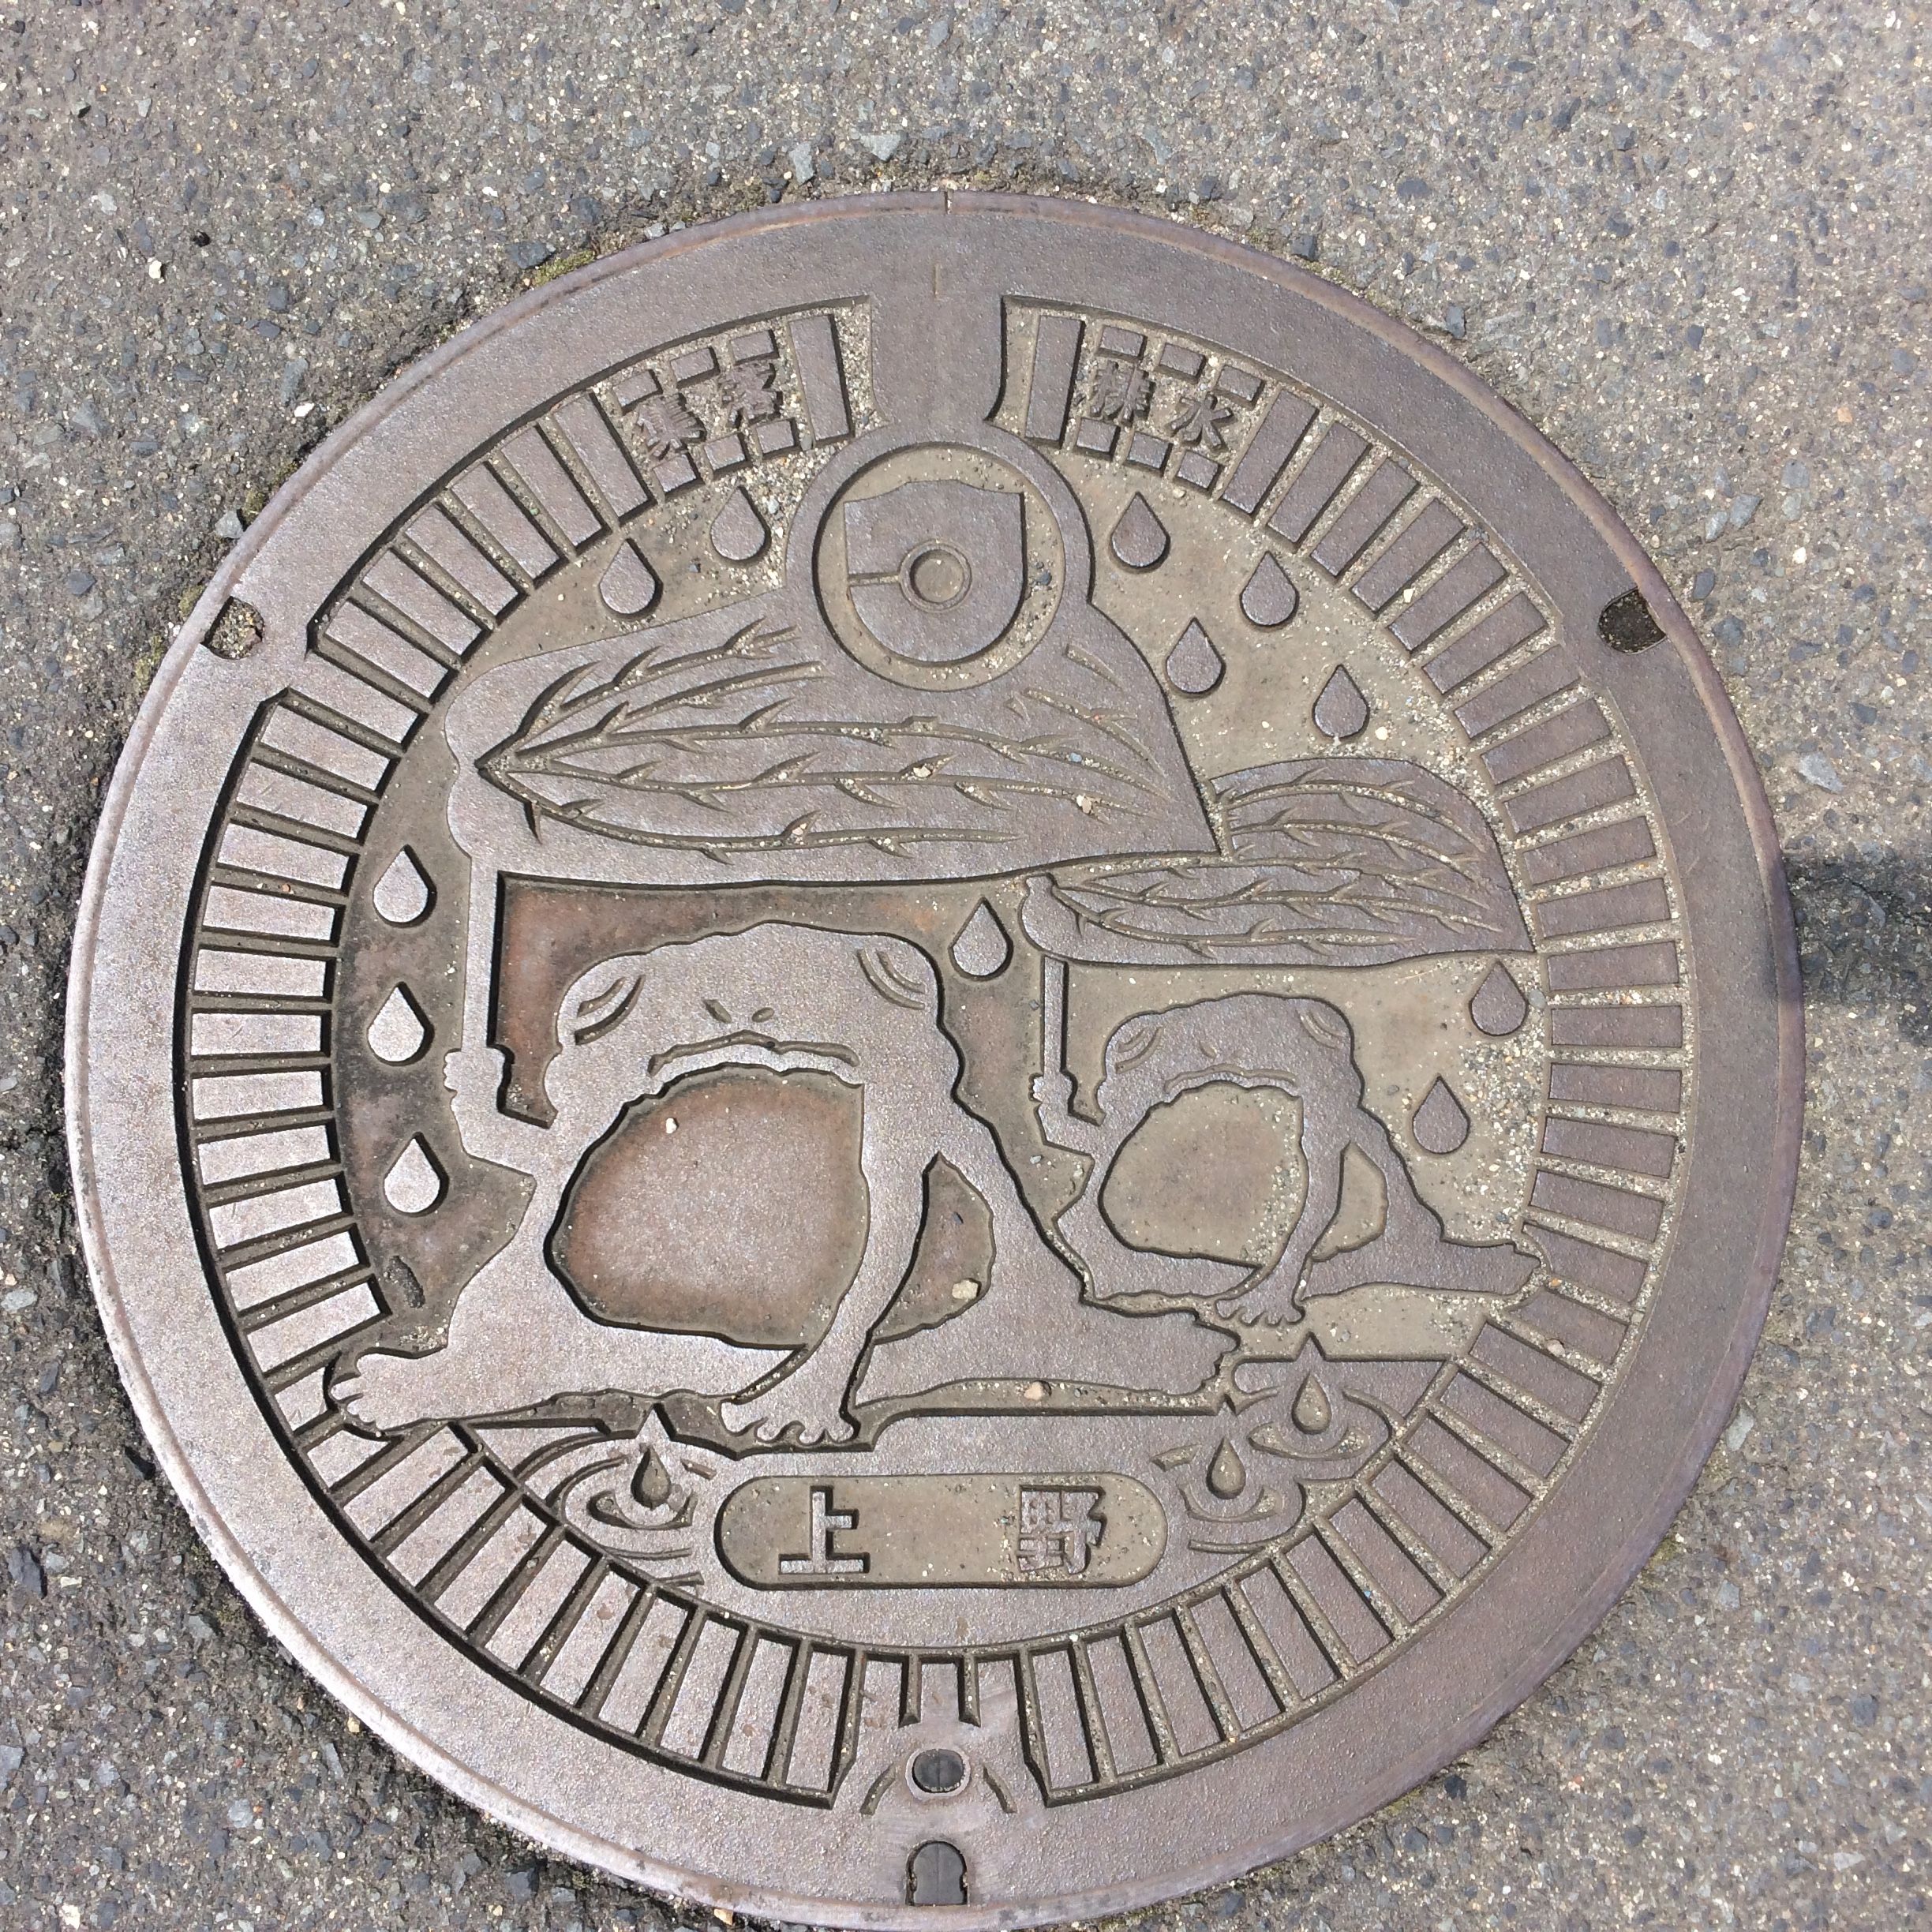 A manhole cover shows two frogs sheltering from the rain under big leaves.